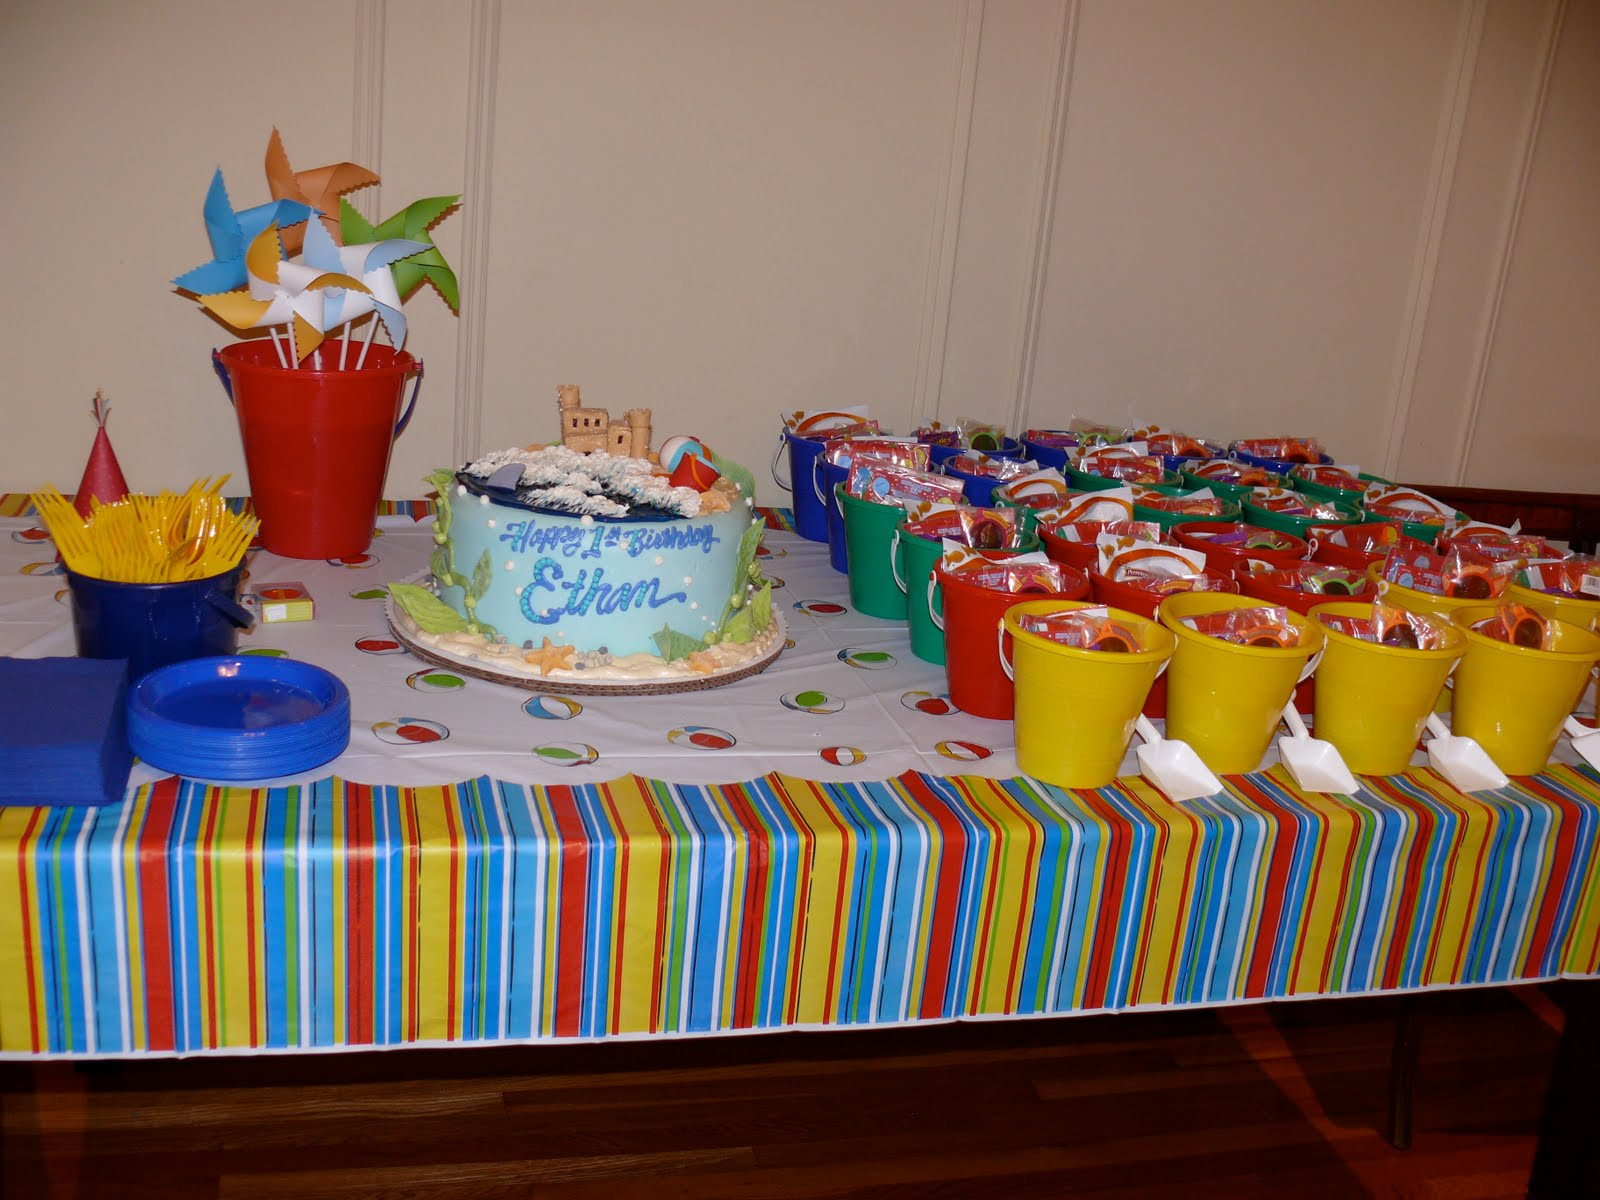 Beach Party Ideas For Toddlers
 Stylish Childrens Parties Beach First Birthday Party